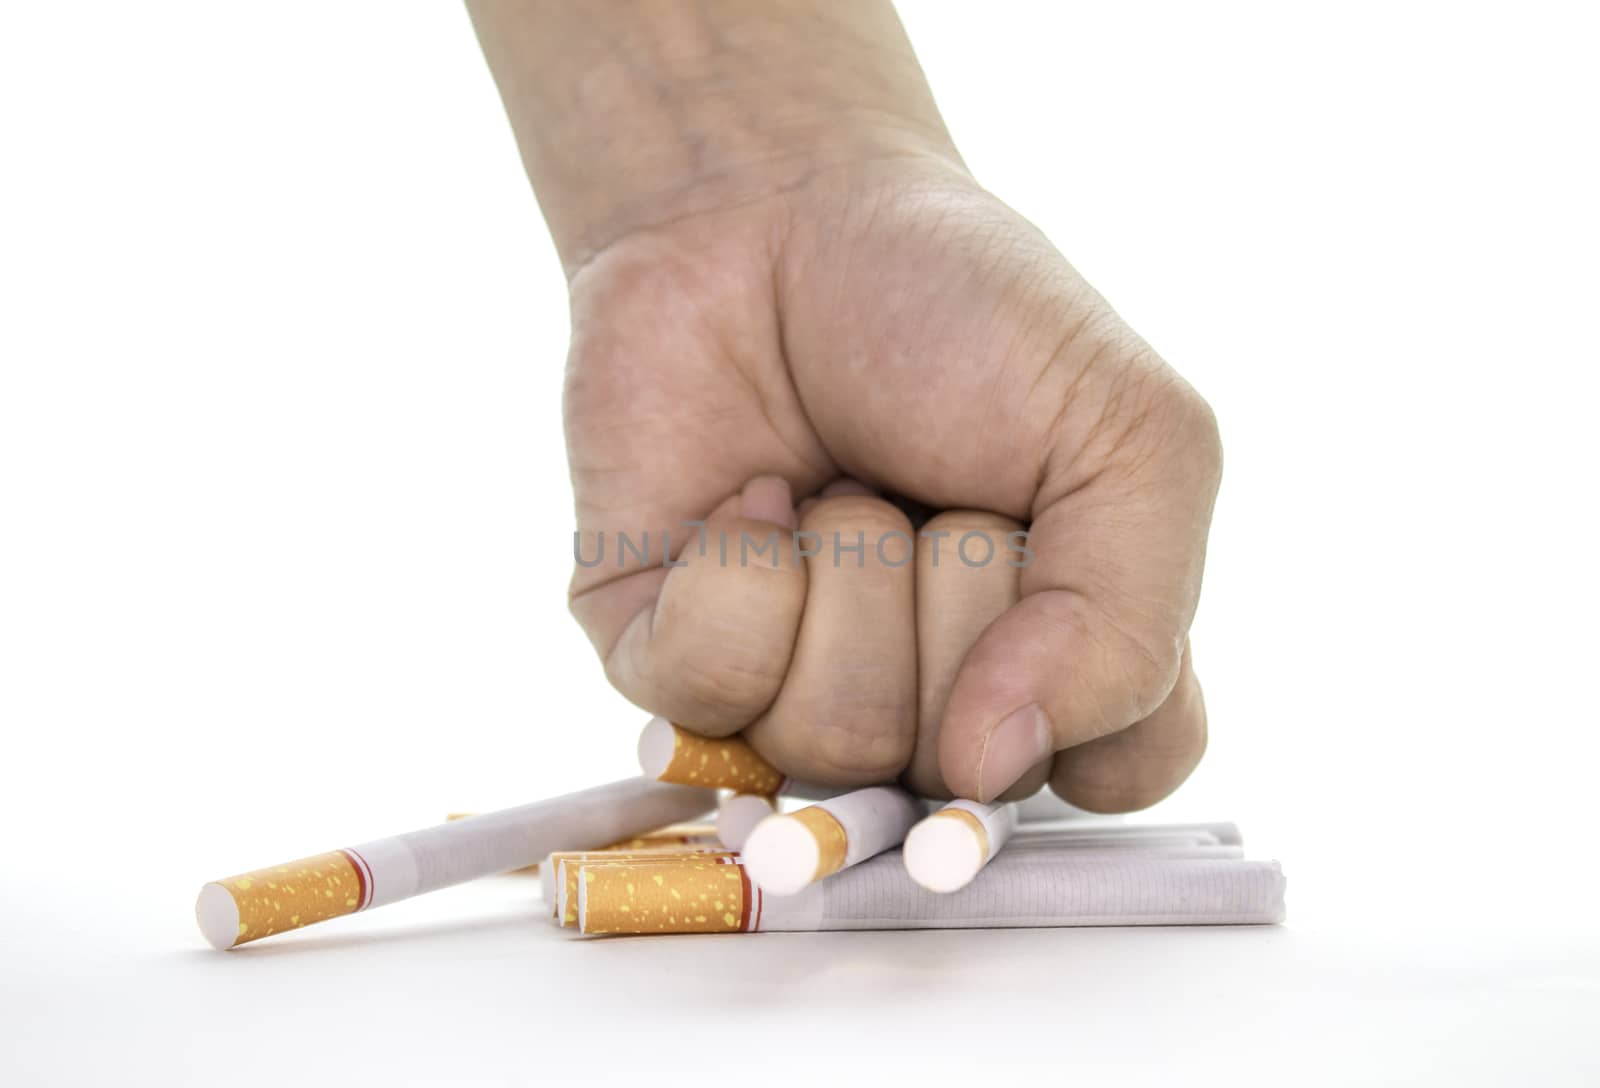 World No Tobacco Day; fist breaking cigarette - stop smoking concept on white background and space for text.